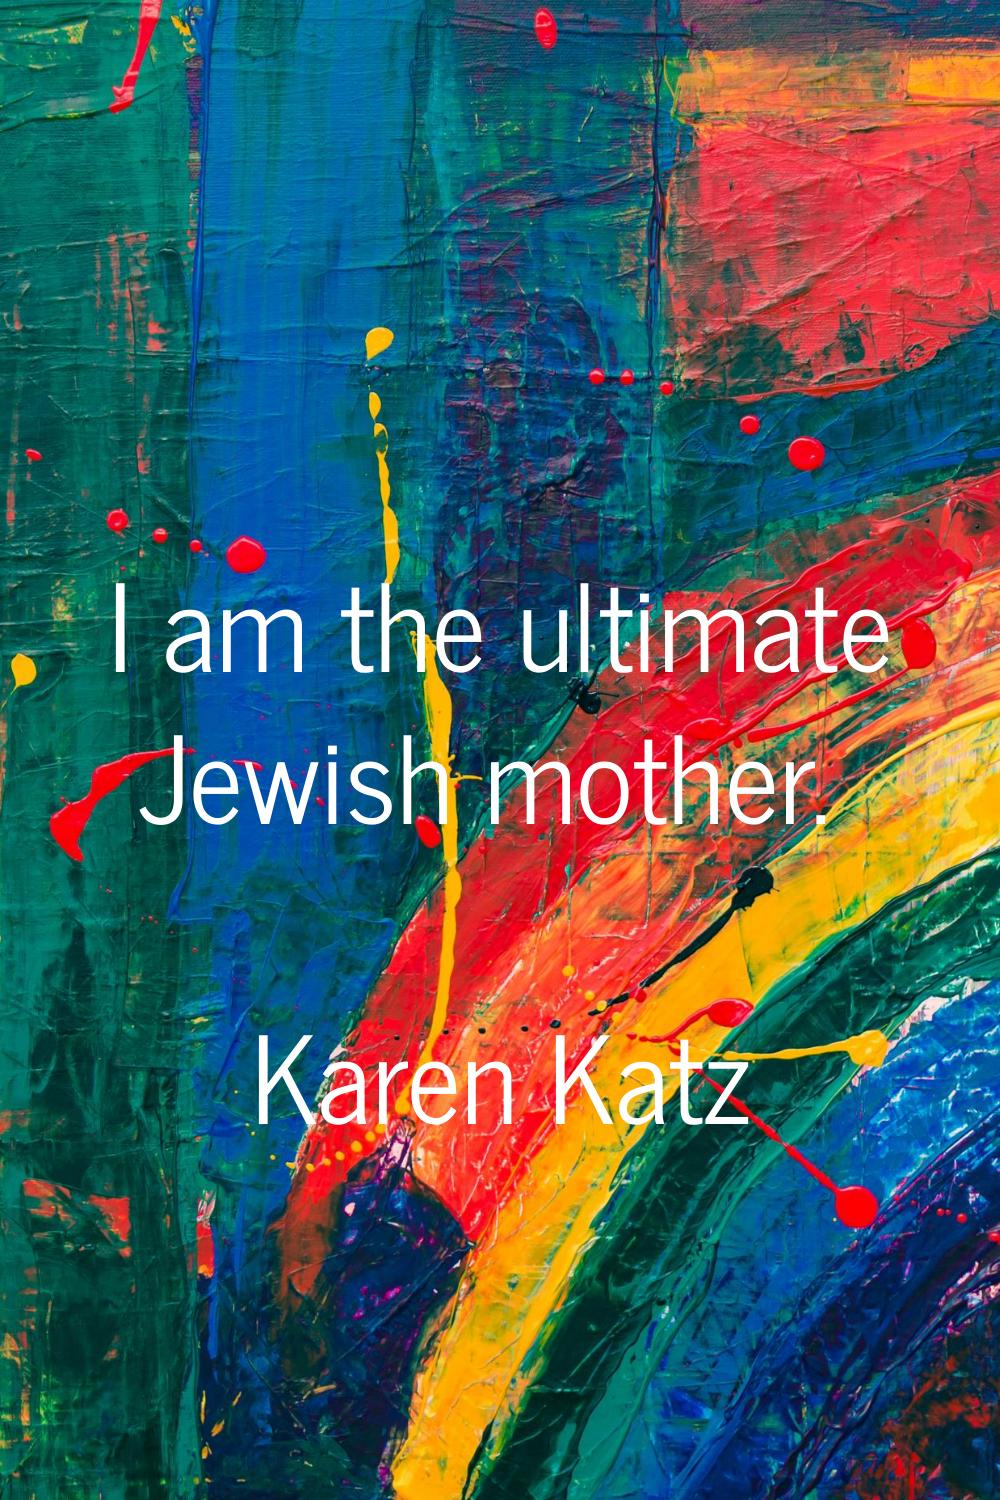 I am the ultimate Jewish mother.